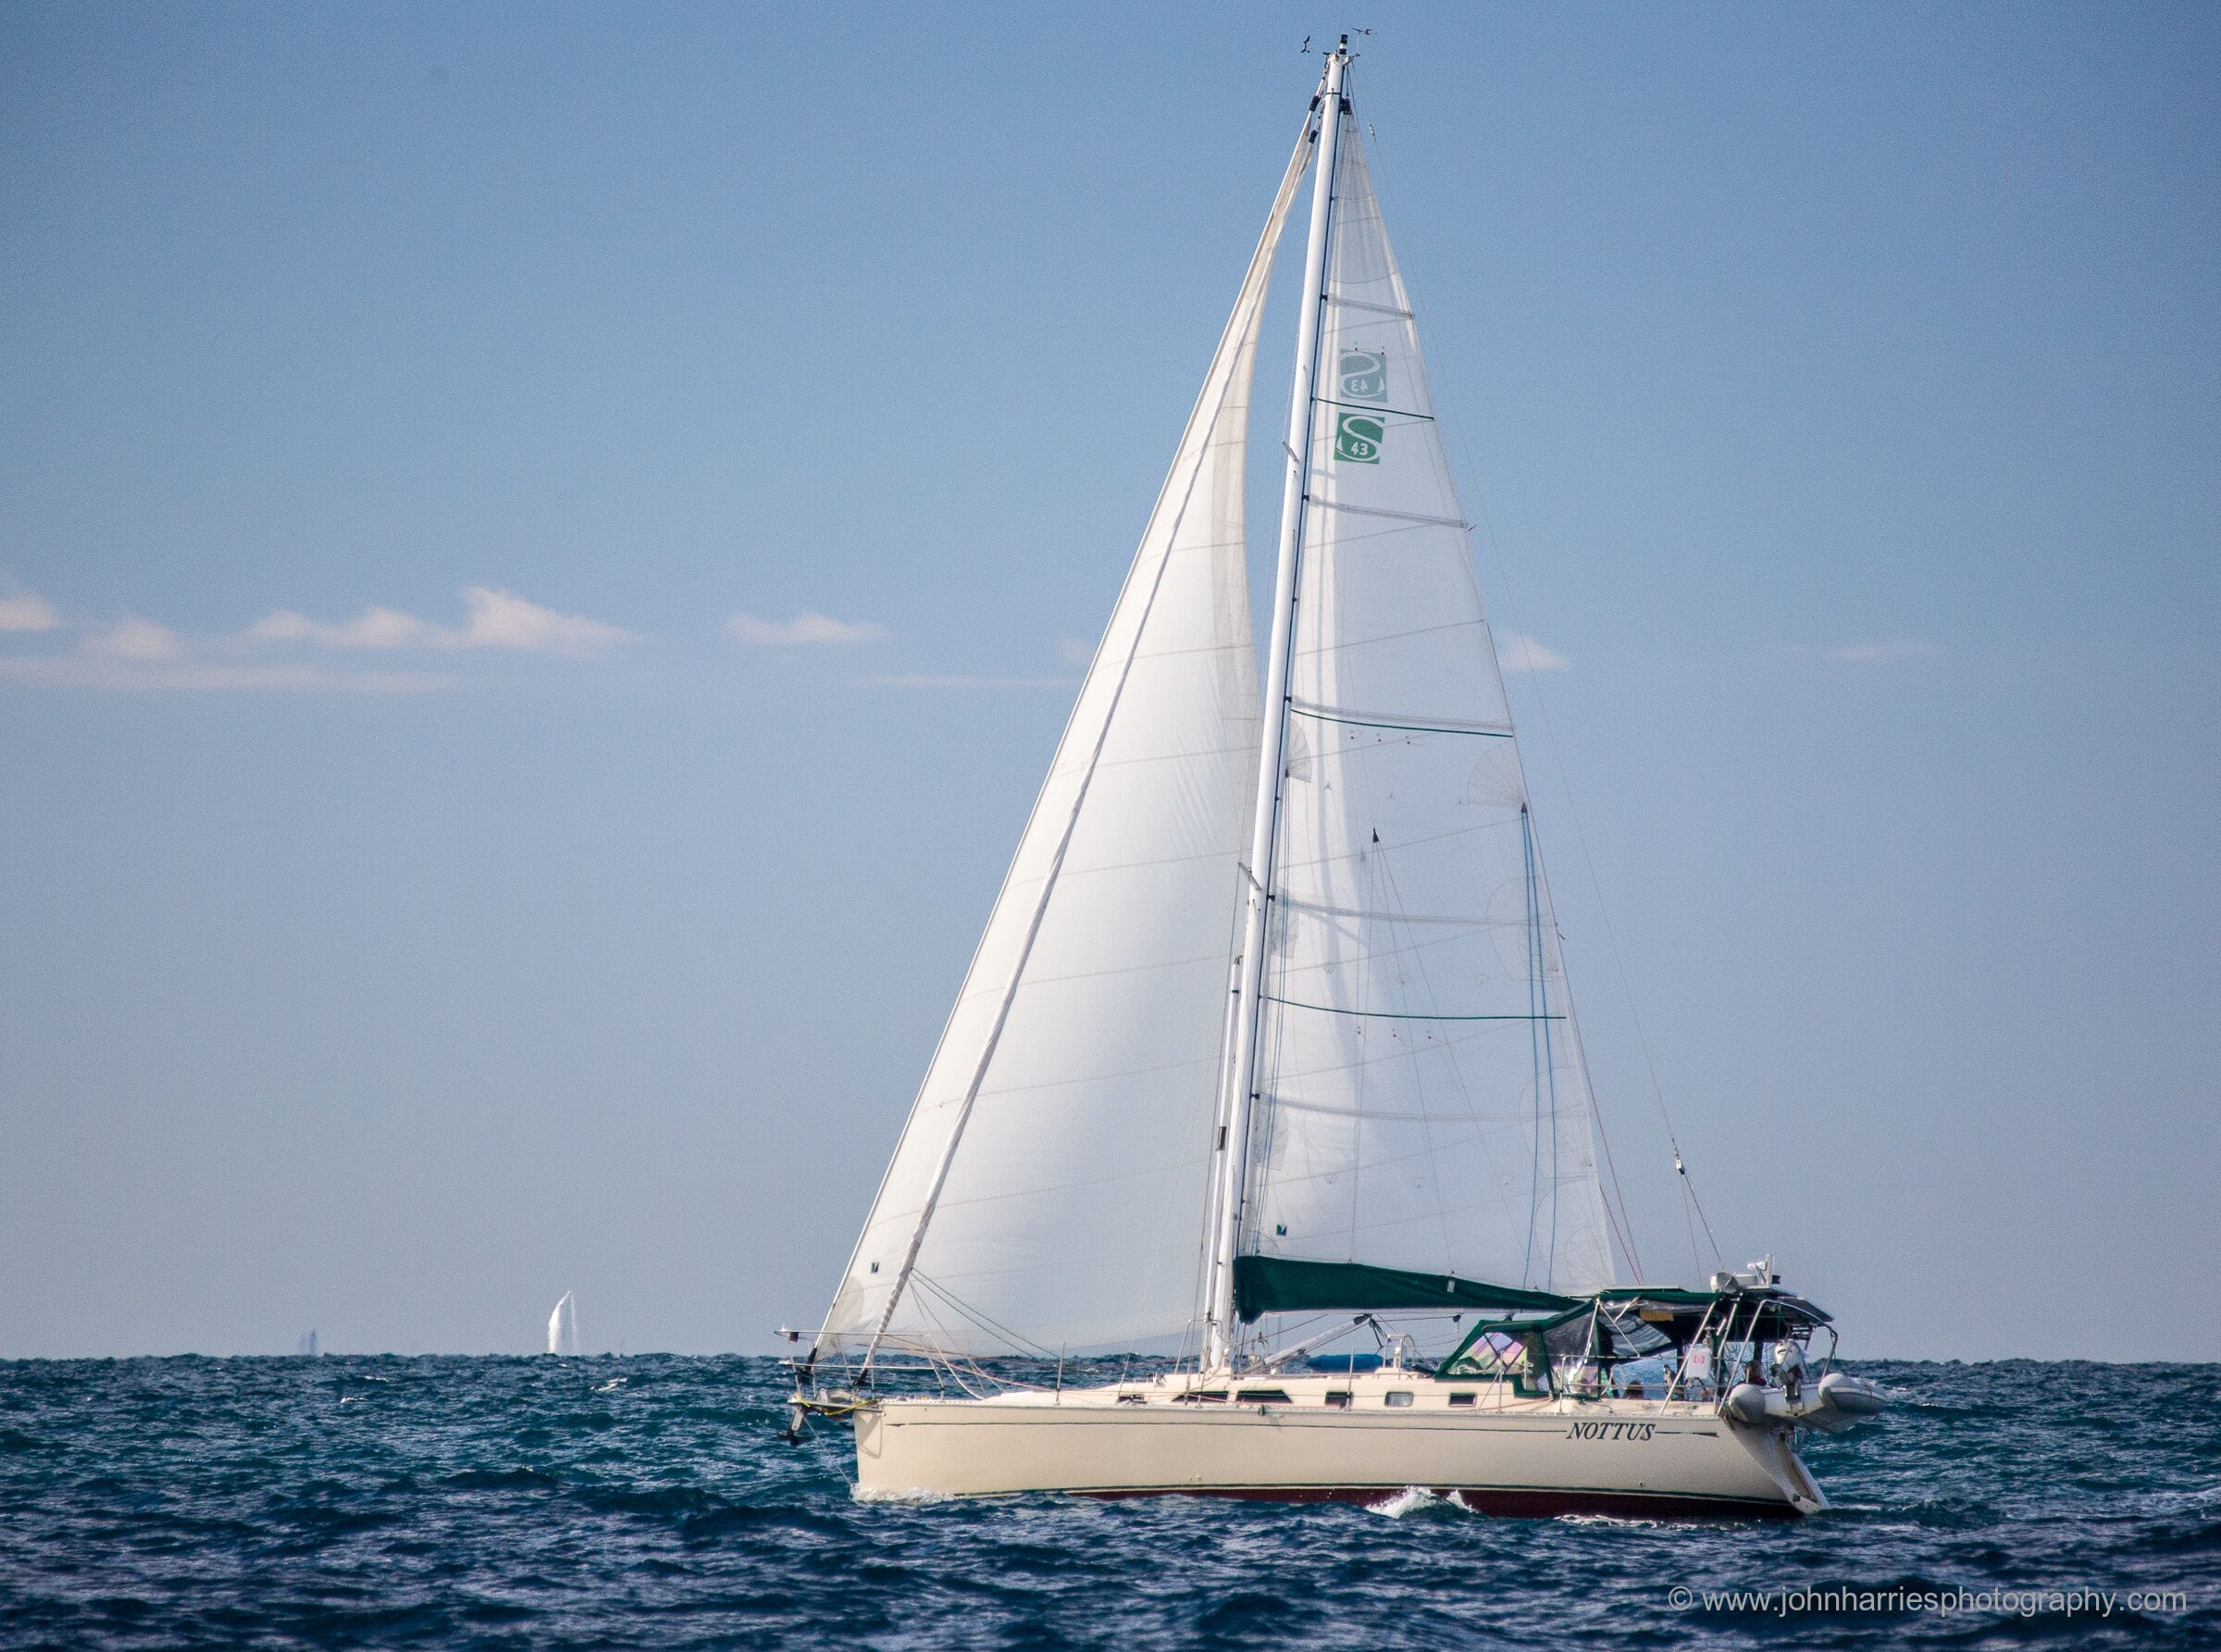 Cruising Rigs—Sloop, Cutter, or Solent?